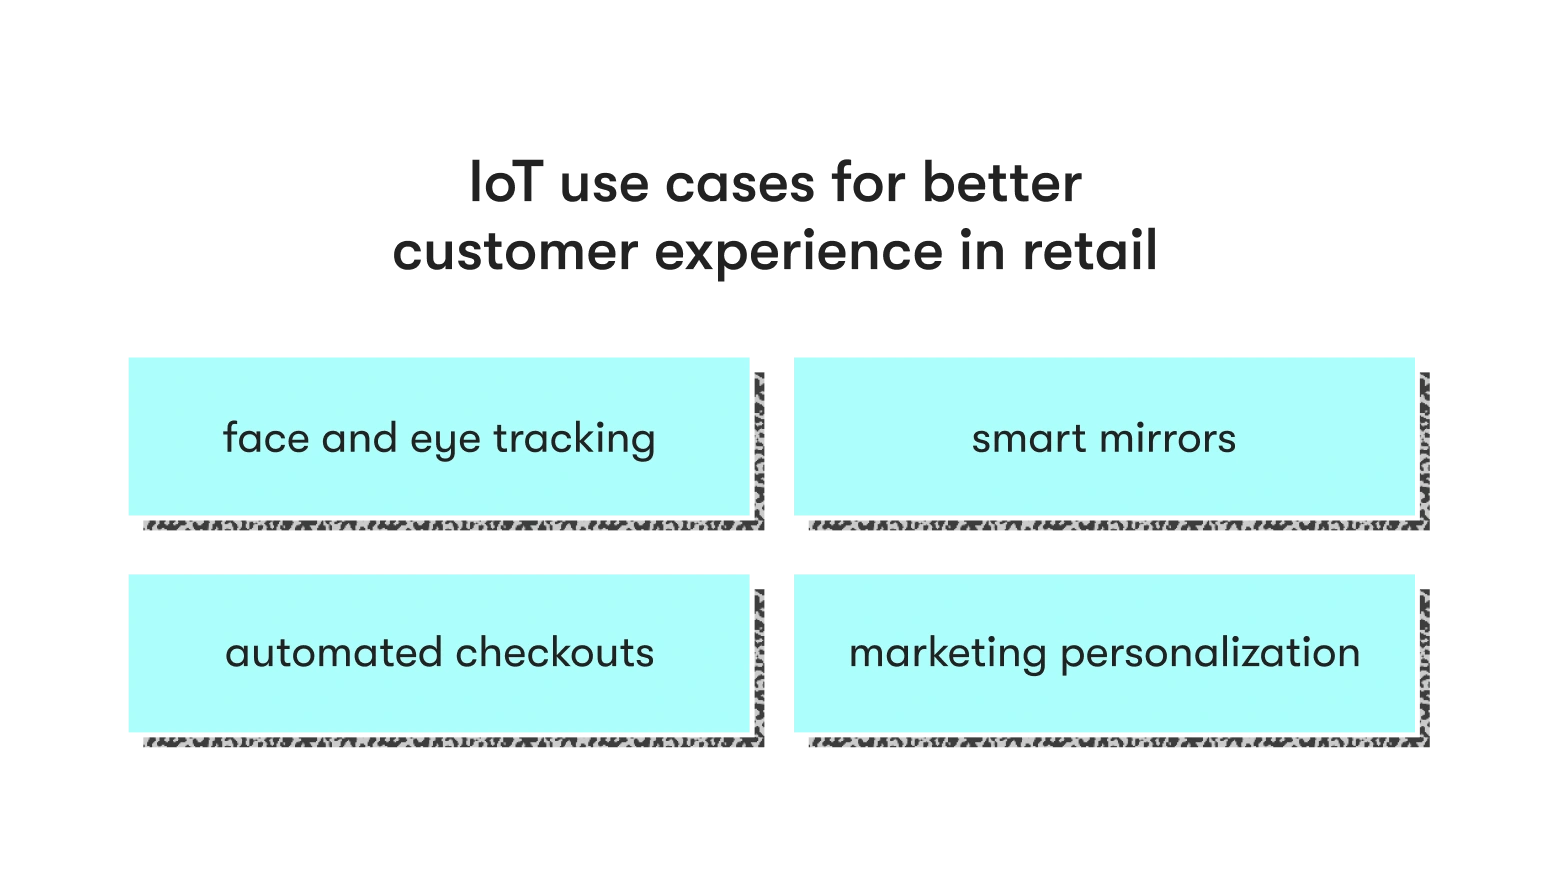 IoT use cases for better customer experience in retail